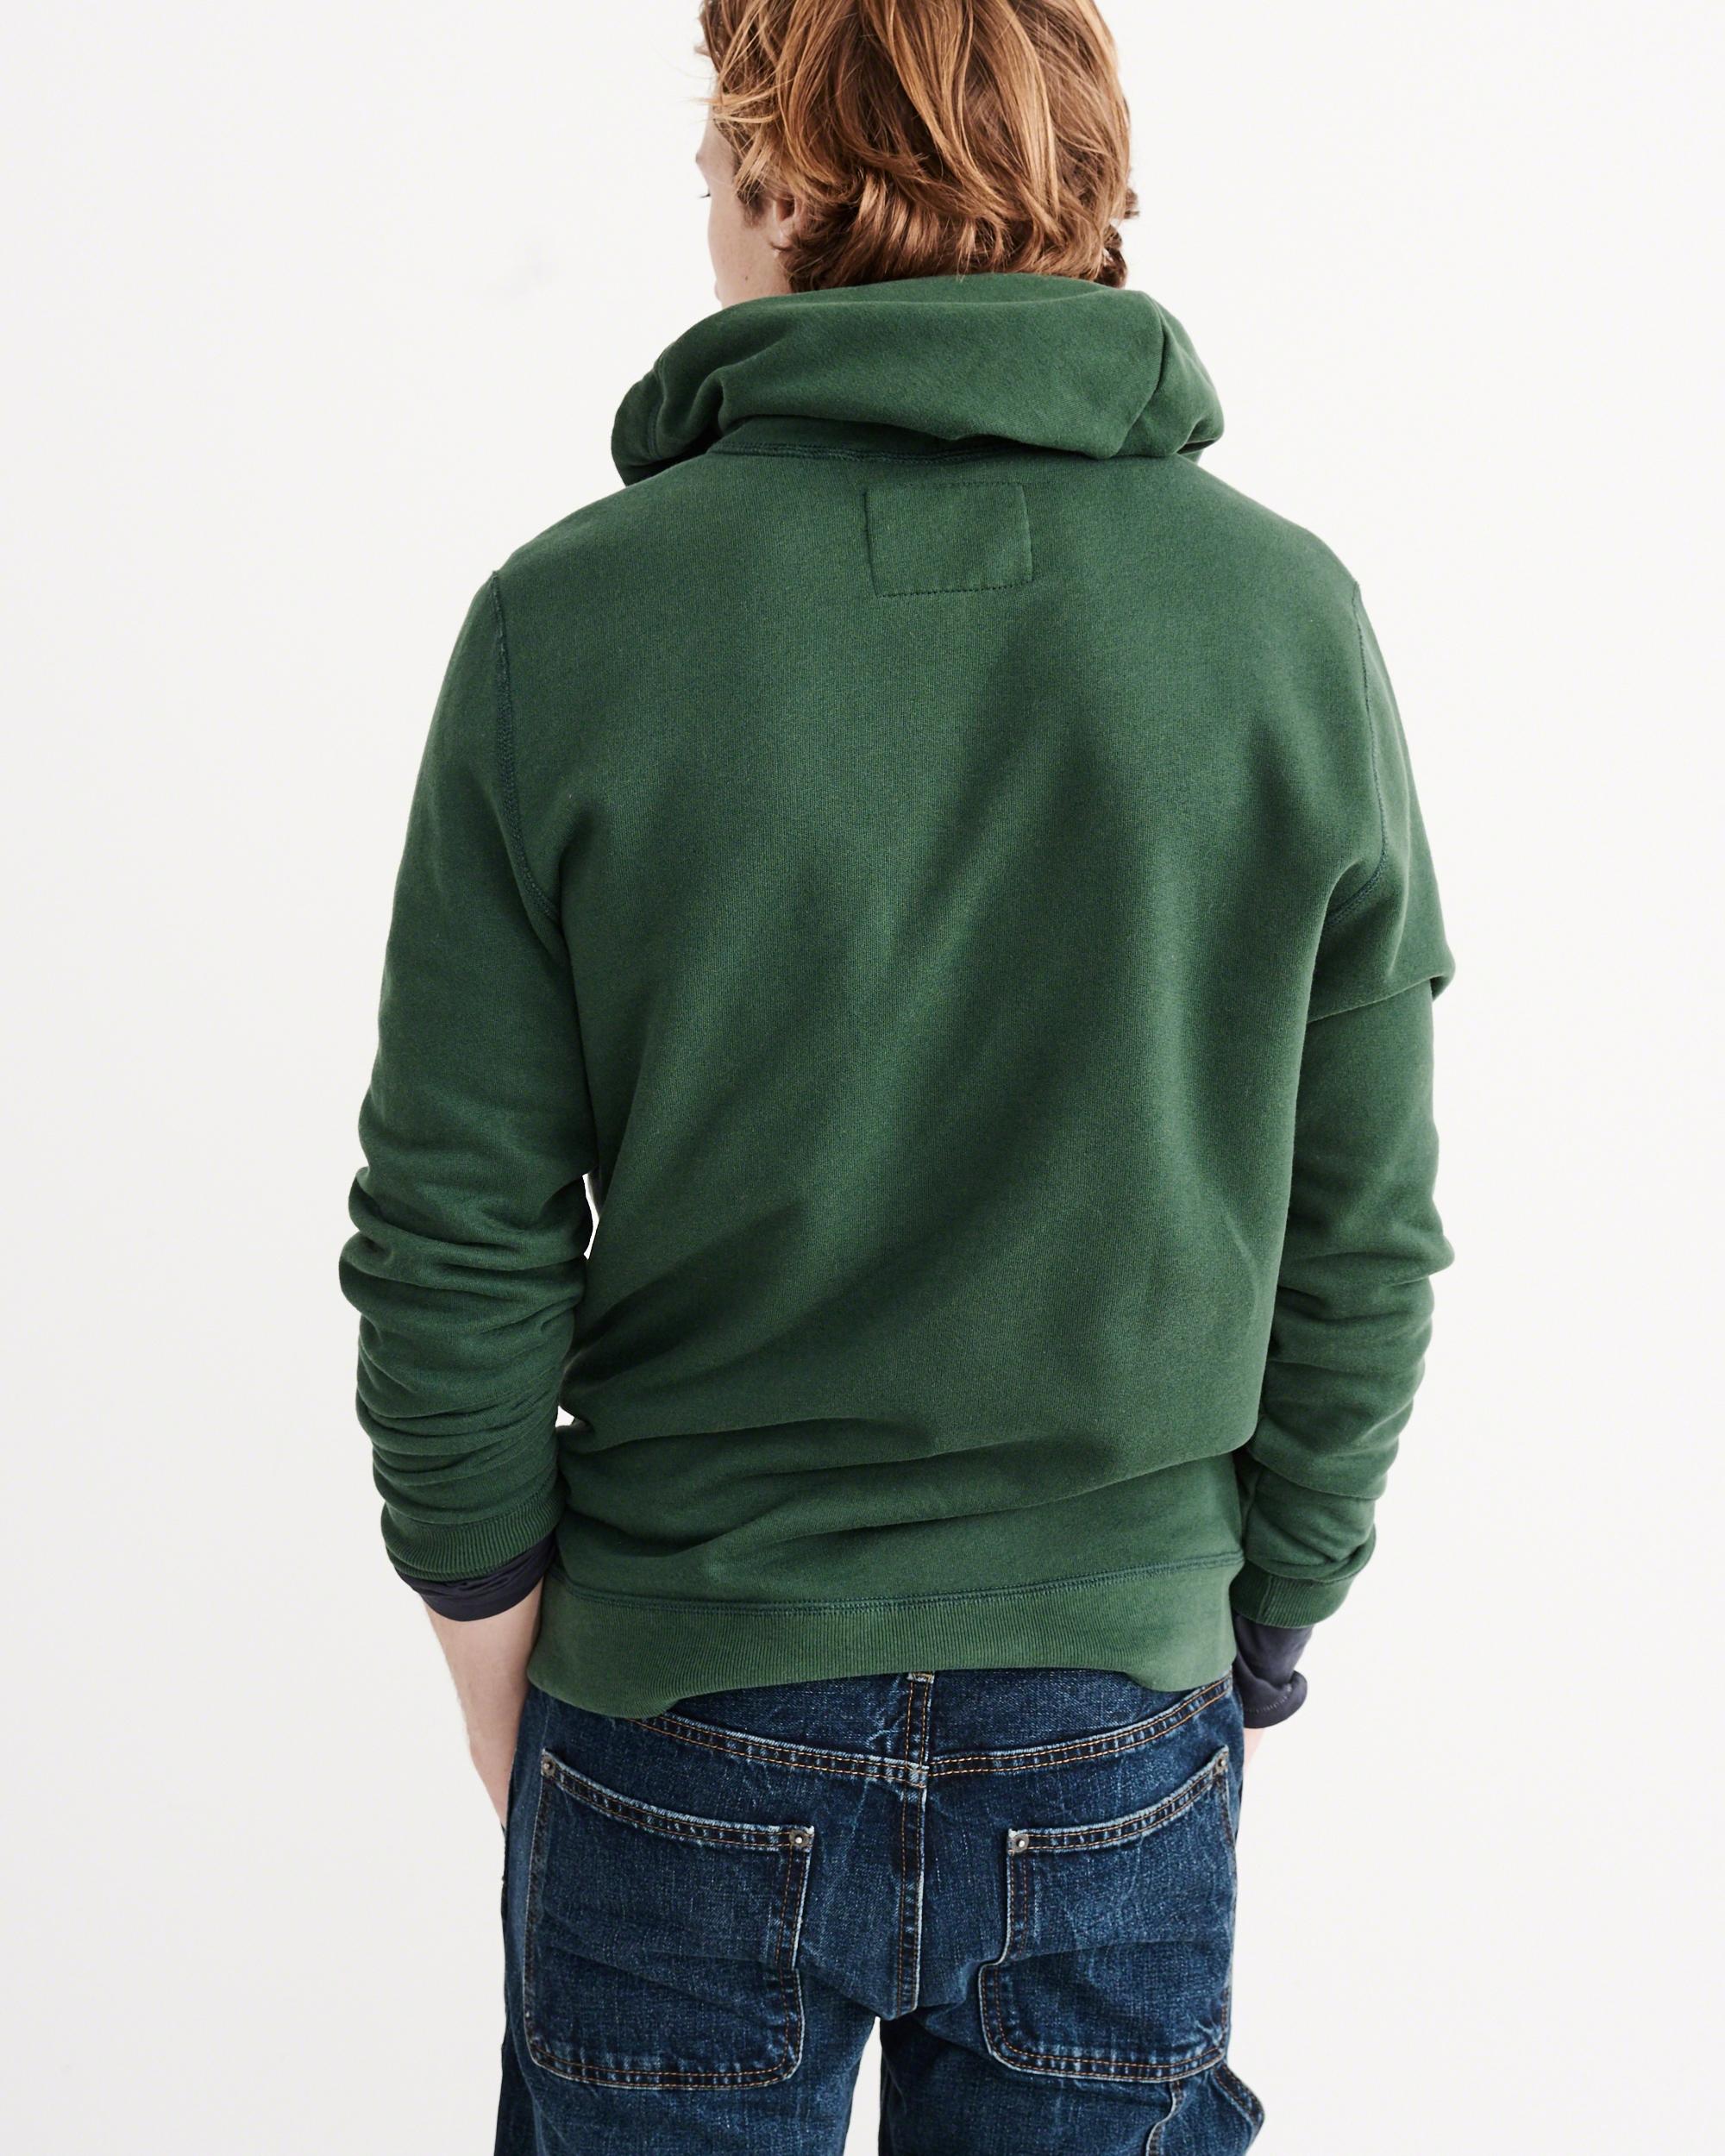 Lyst - Abercrombie & fitch Graphic Full-zip Hoodie in Green for Men